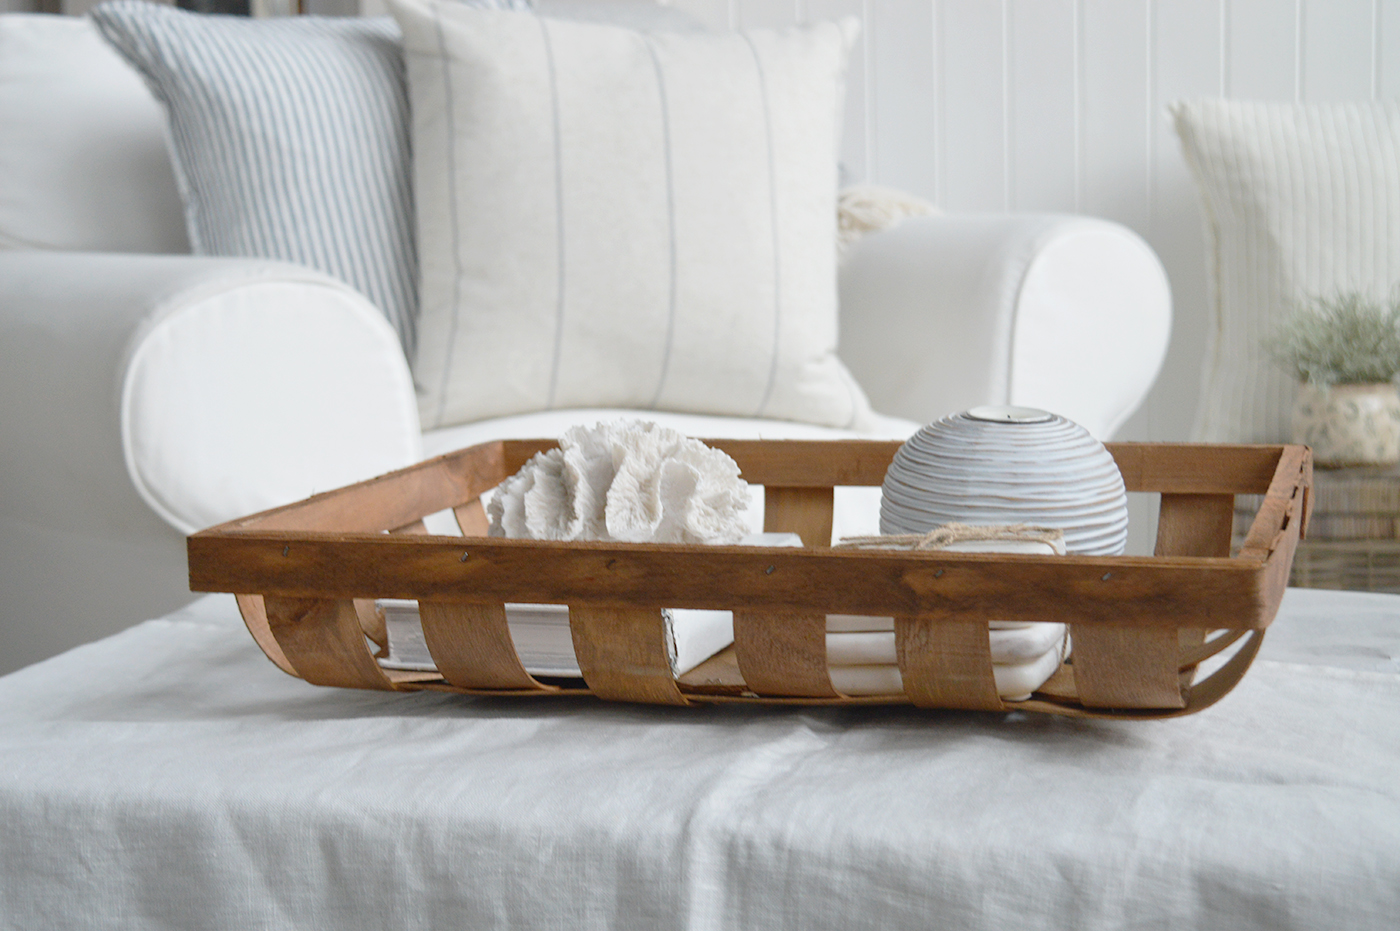 Haverton Basket Trays - modern Farmhouse, coastal and Country Furniture and Interiors